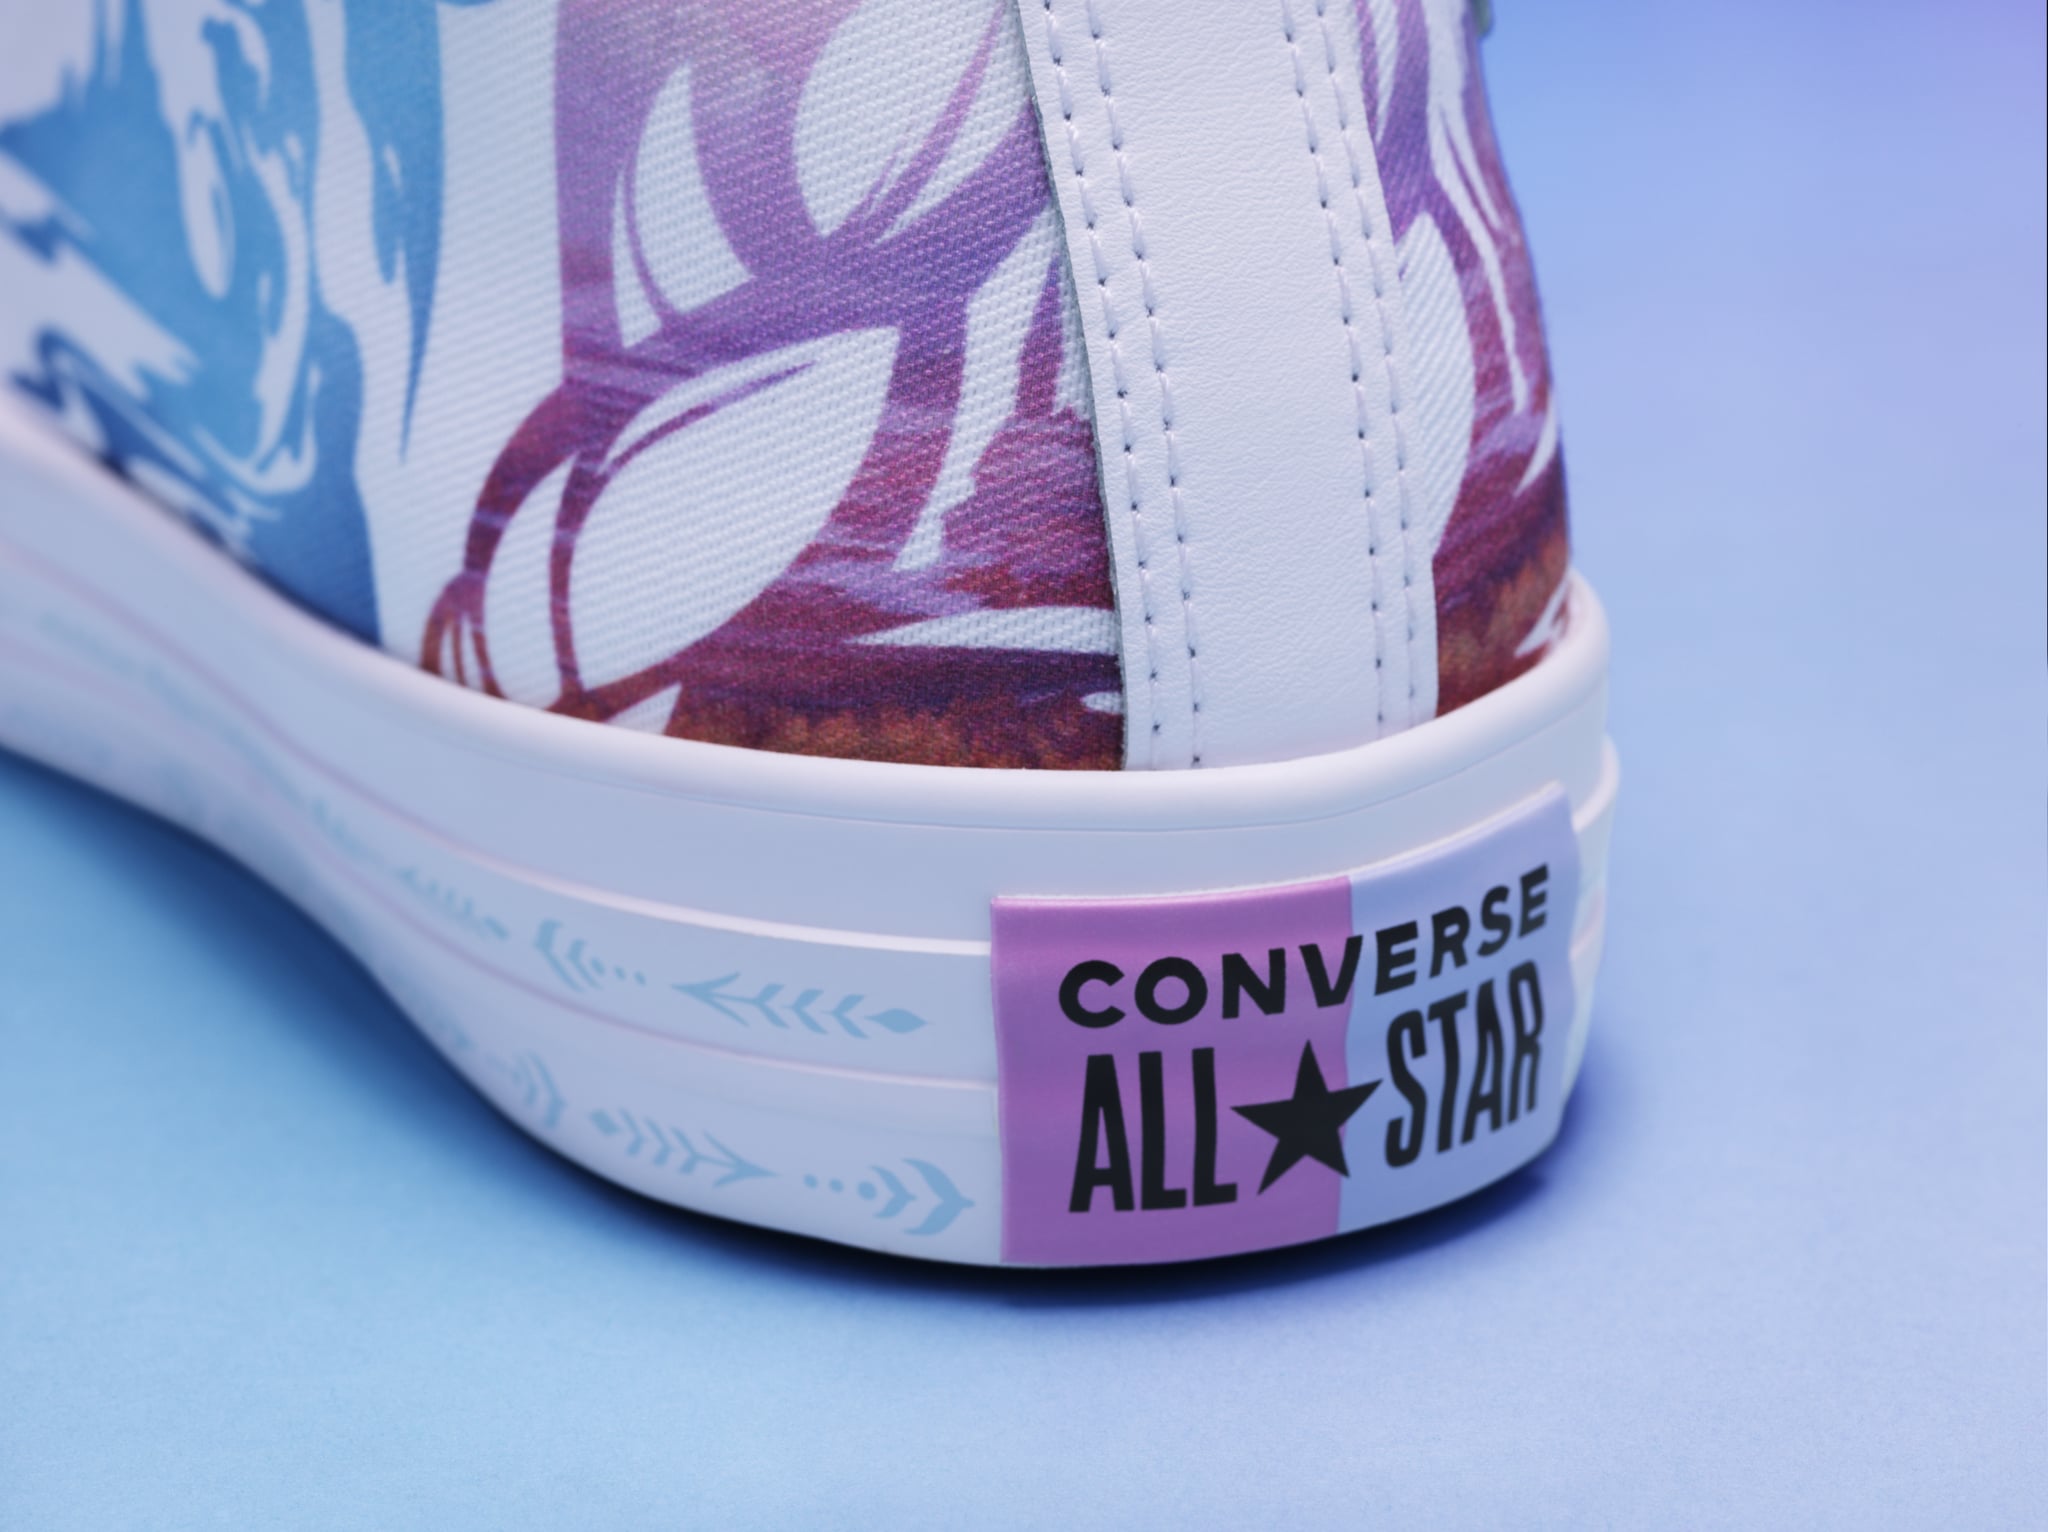 Toddlers, Kids & Parenting | Converse Released Frozen 2 Styles For Kids, and Awww, Look at the Olaf Pair! | Family Photo 26